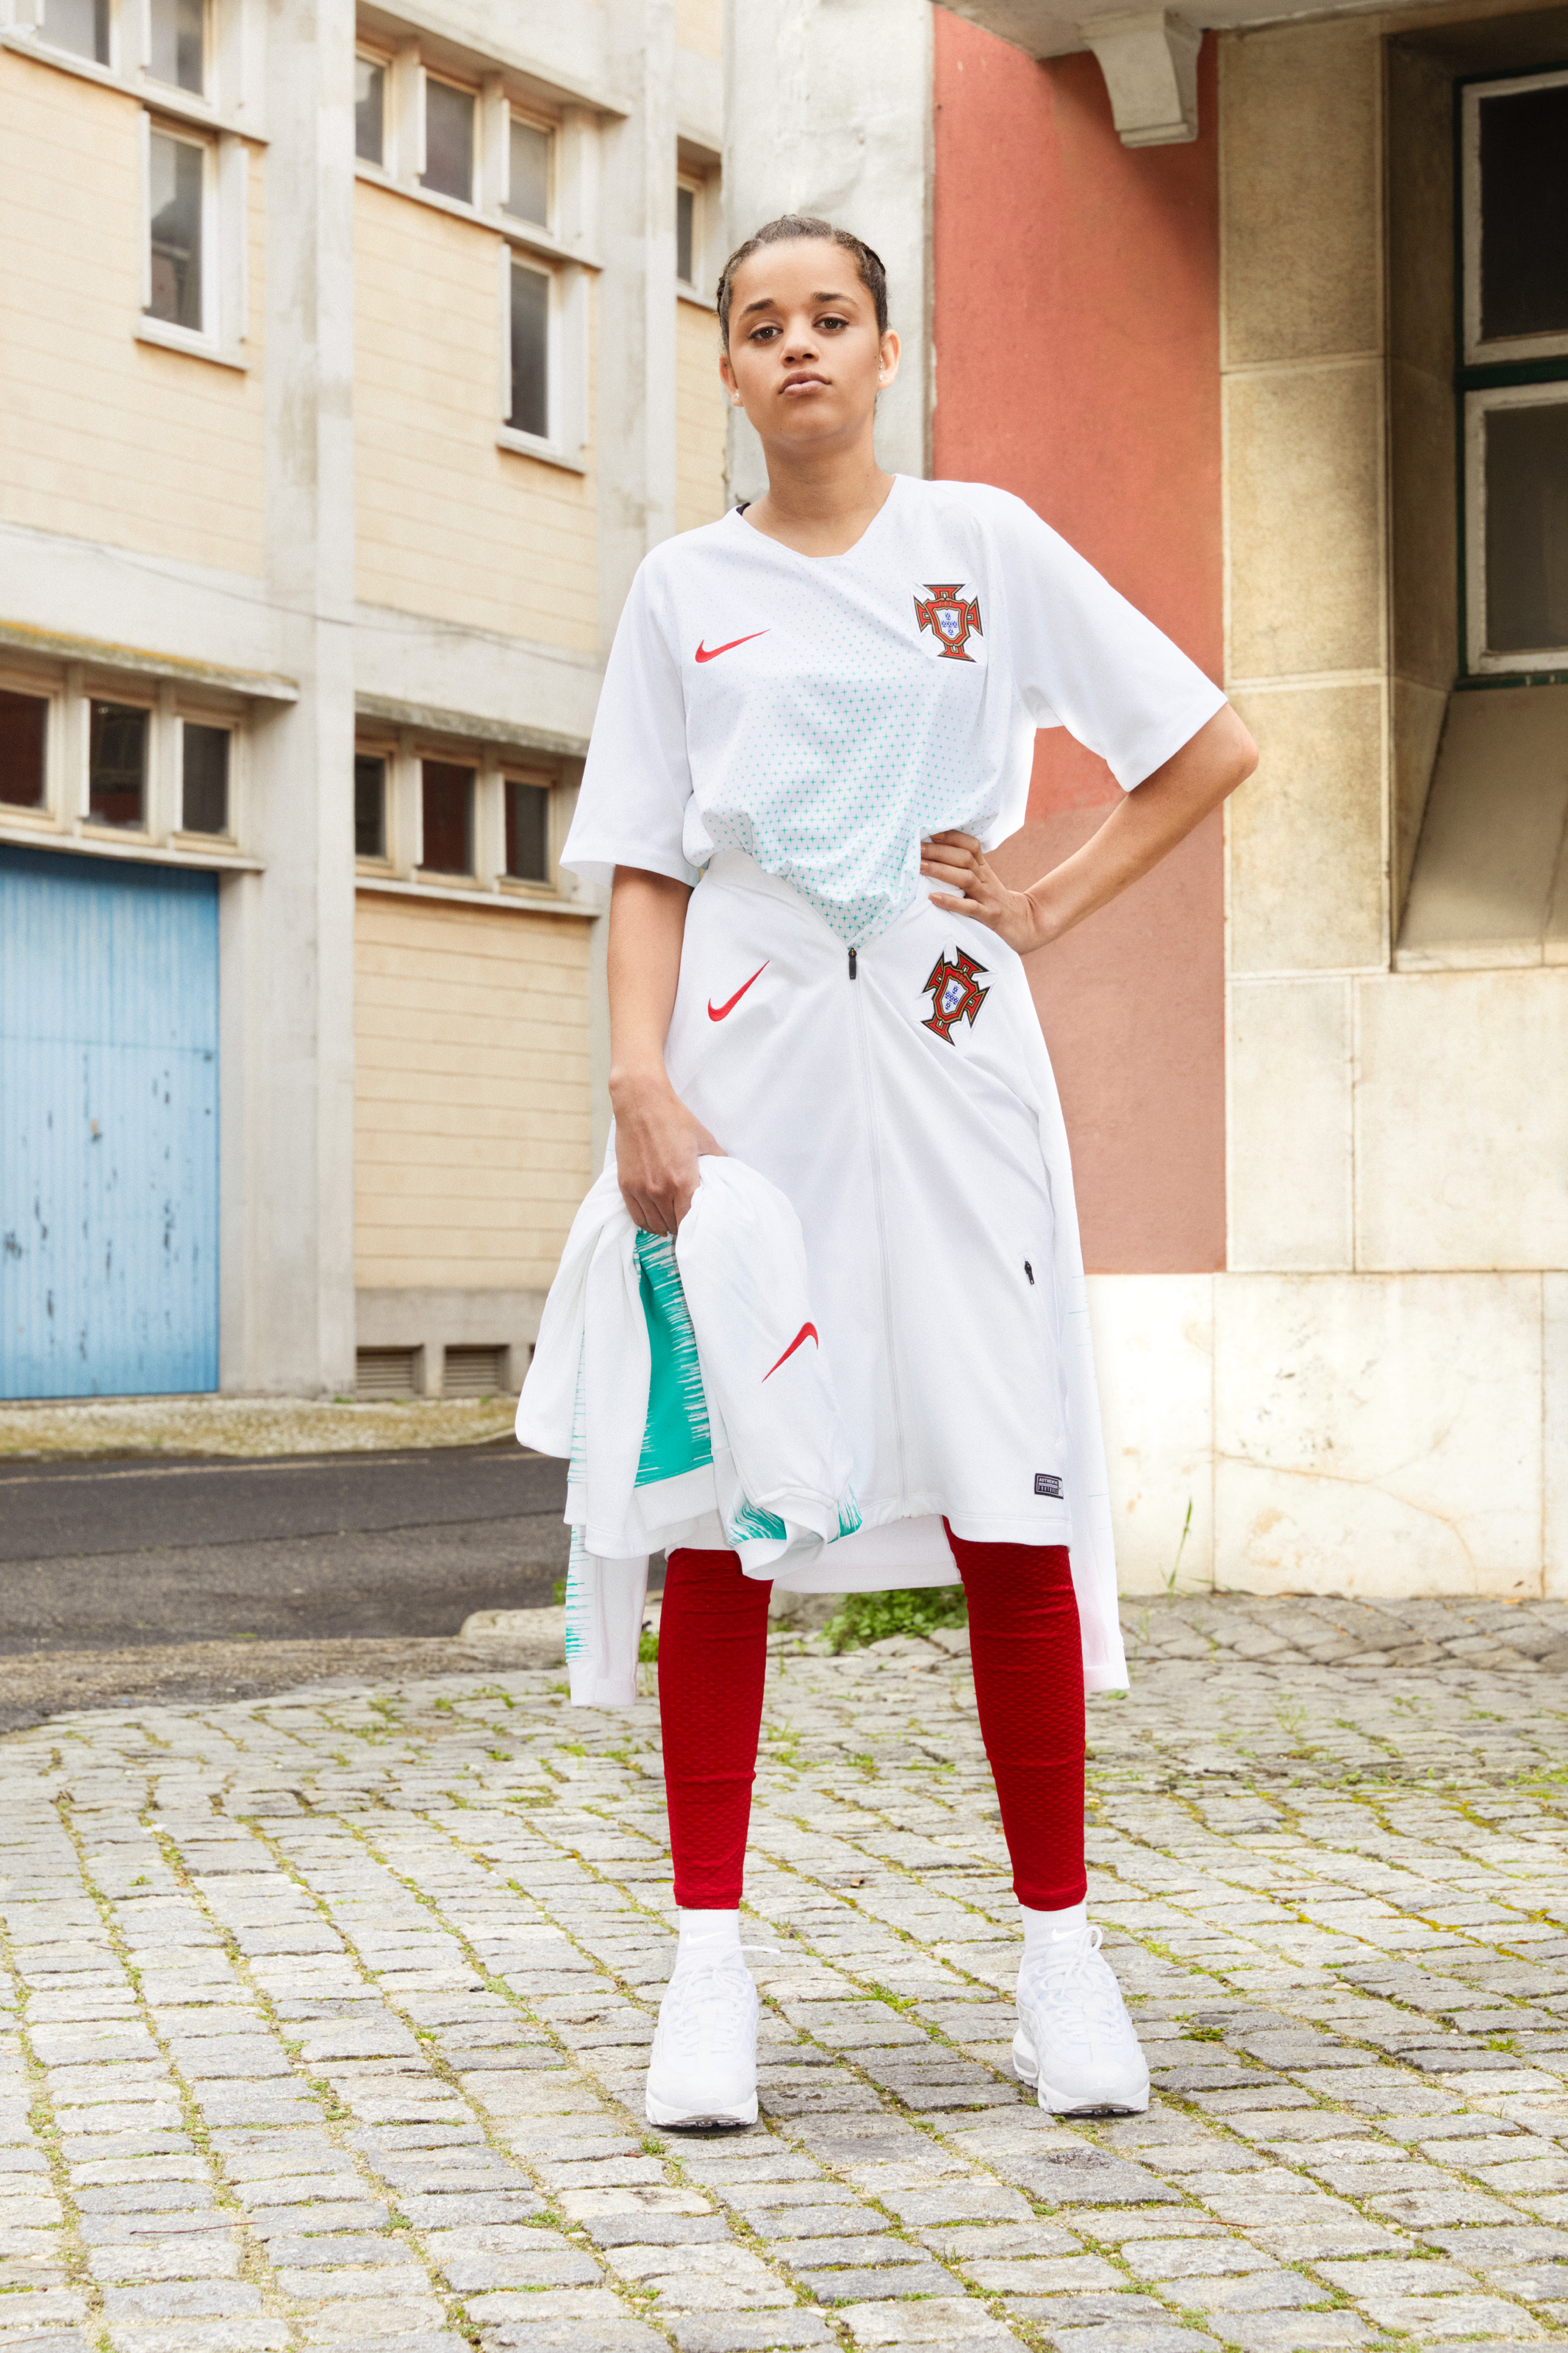 Nike_News_2018_Portuguese_Football_Federation_Collection_7_78115.jpg